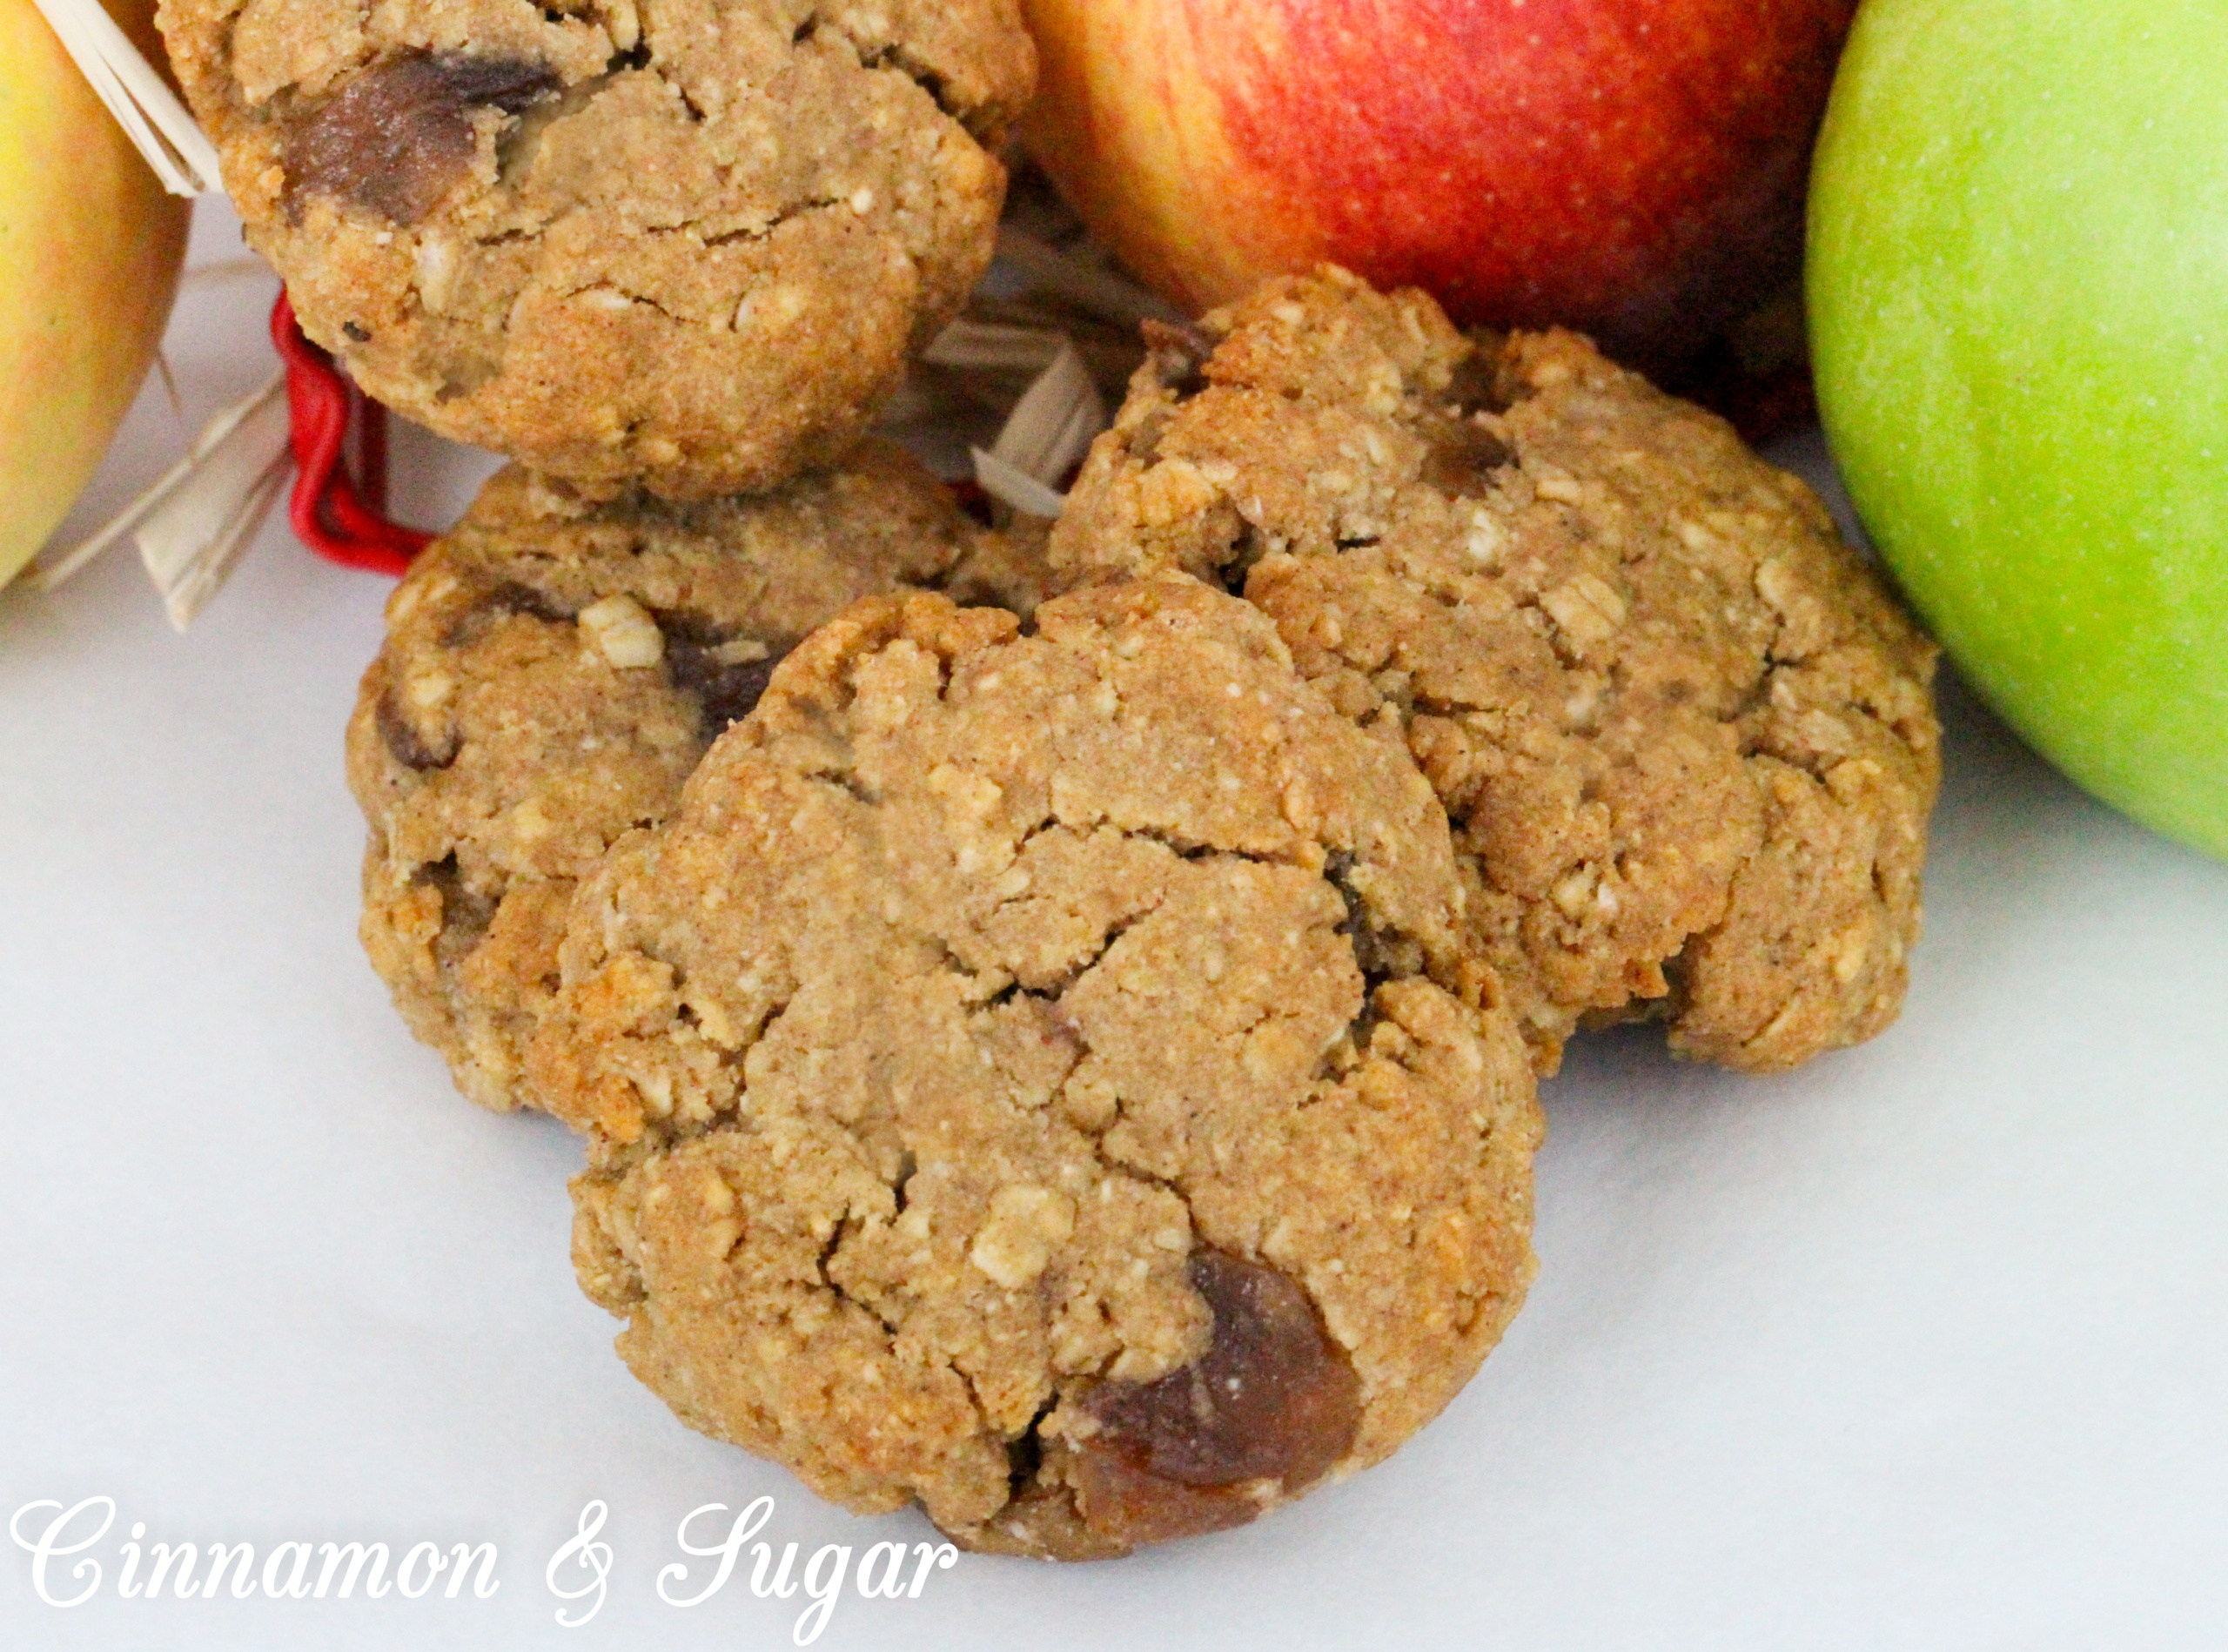 Appie Oaters combine buttery, caramelized apples mixed into an oat cookie dough creating a treat that is reminiscent of apple pie. Perfect for snacks and even breakfast! Recipe shared with permission granted by Chelsea Thomas, author of APPLE DIE. 